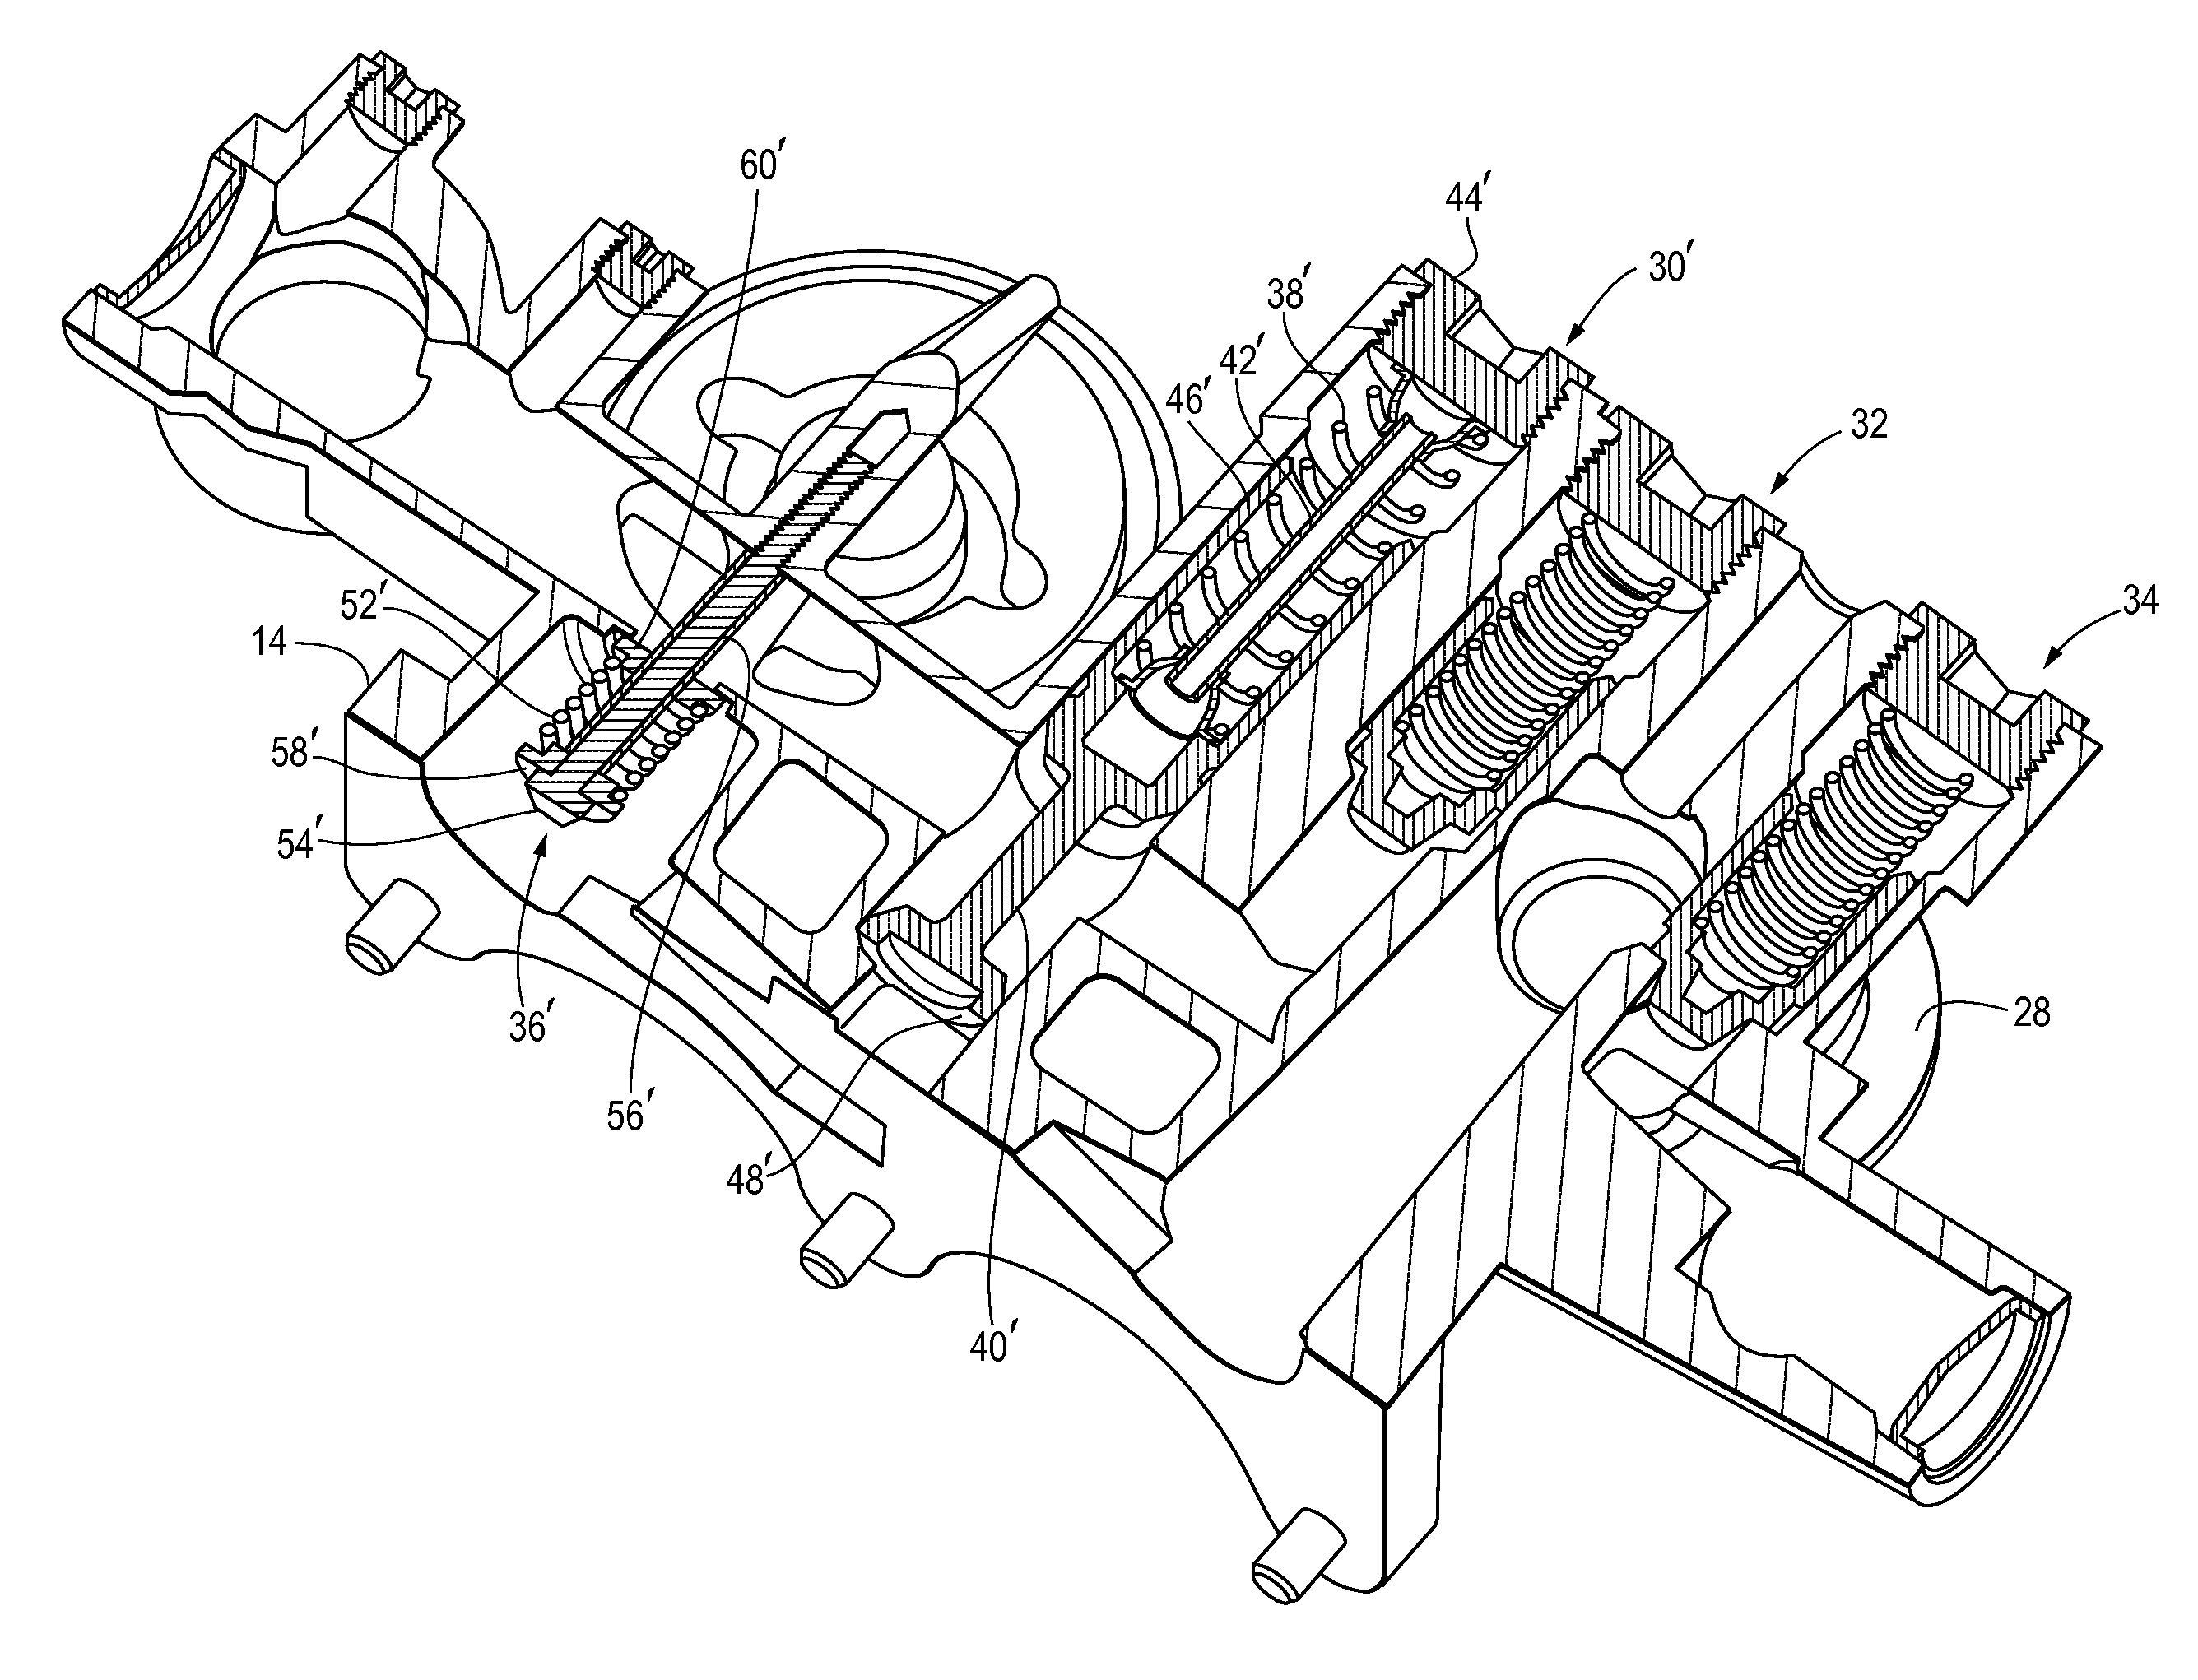 Apparatus and Method for Replacing an Oil Pressure Regulating Assembly and a High Pressure Relief Valve Assembly